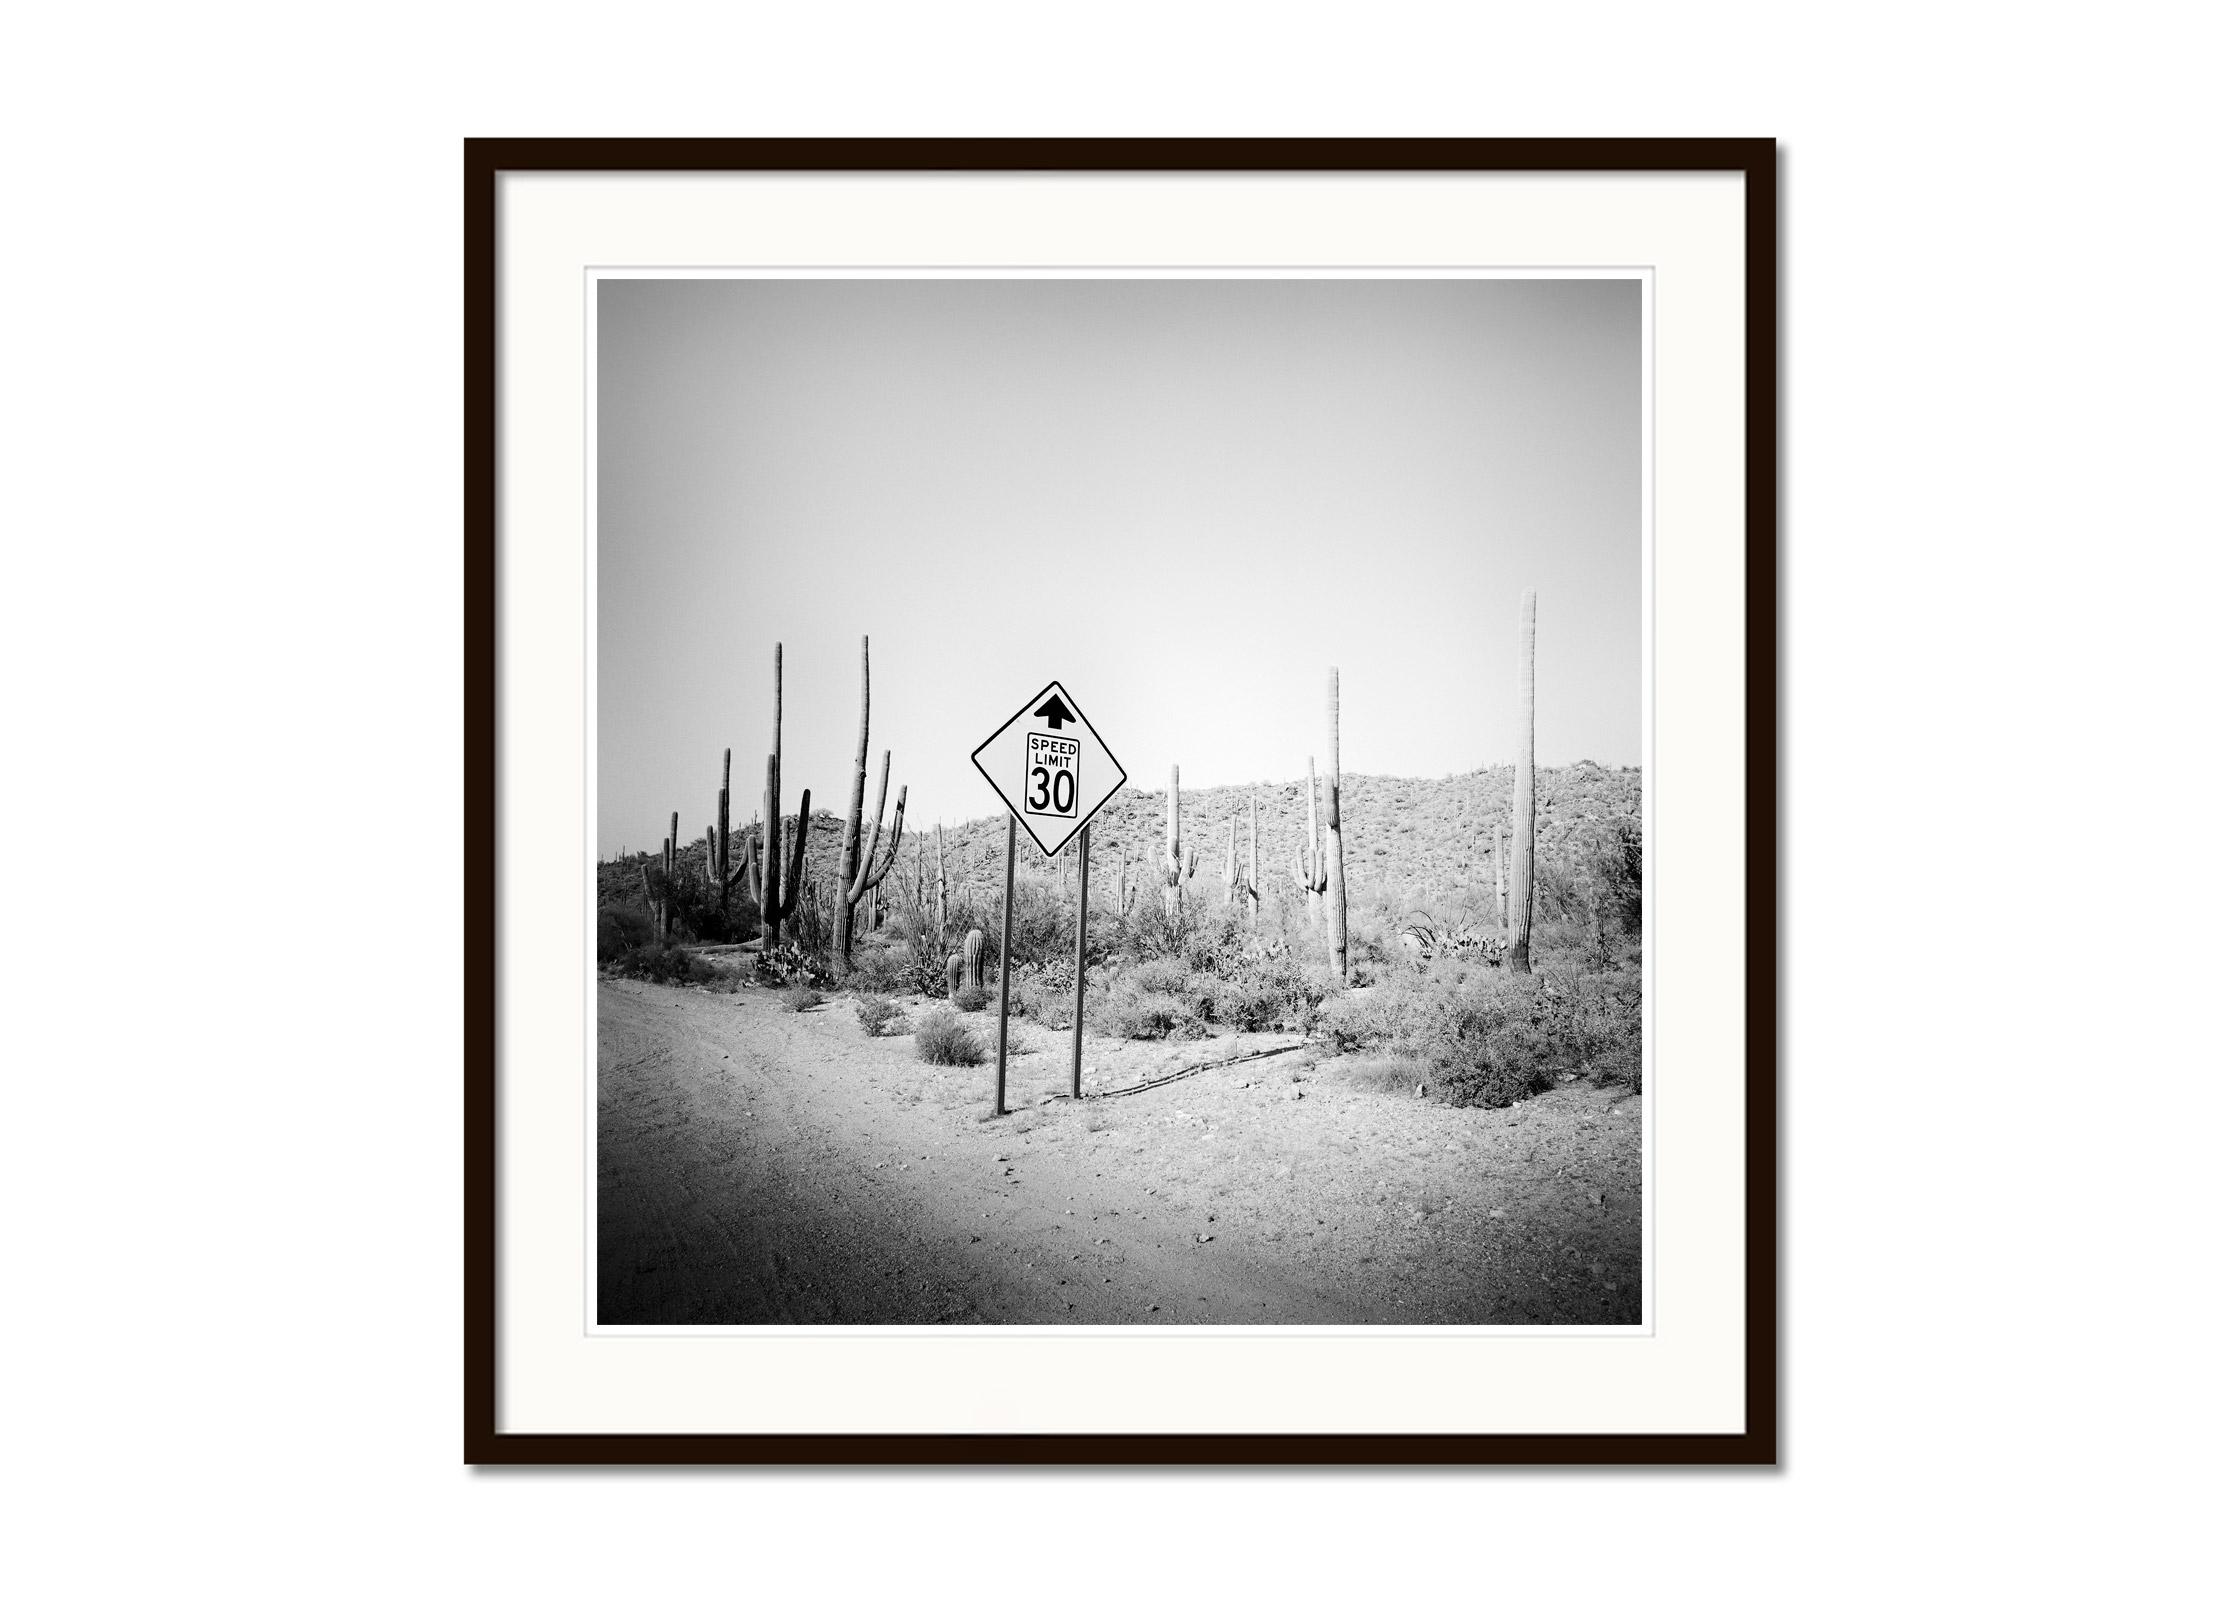 Speed Limit, Desert, Cactus, Arizona, black and white art landscape photography - Gray Black and White Photograph by Gerald Berghammer